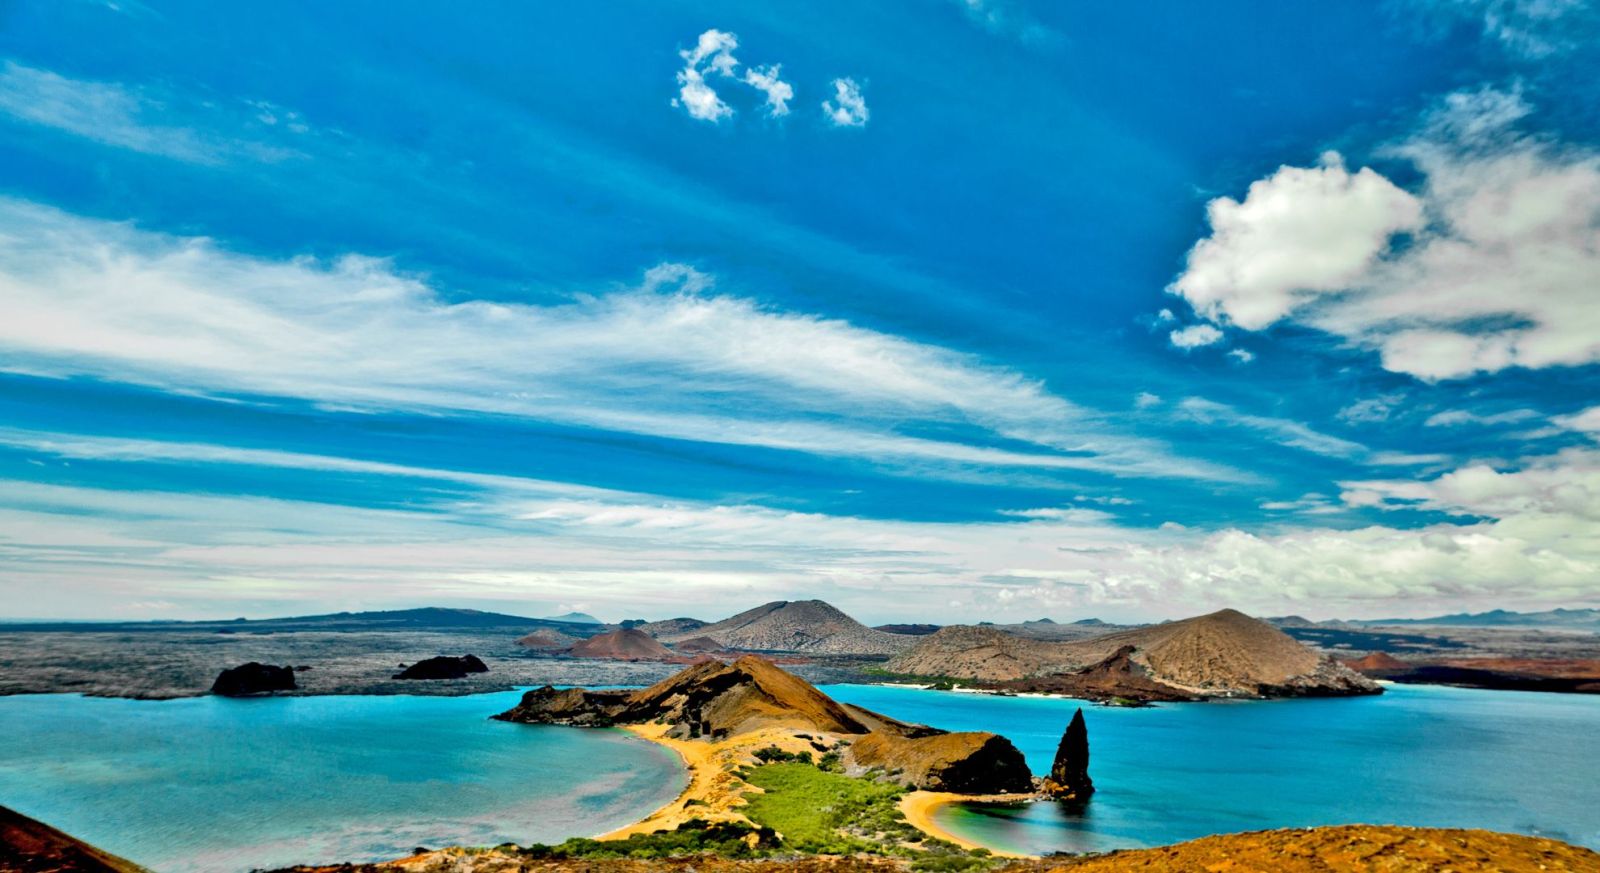 Holiday To The Galapagos. Stunning Scenery